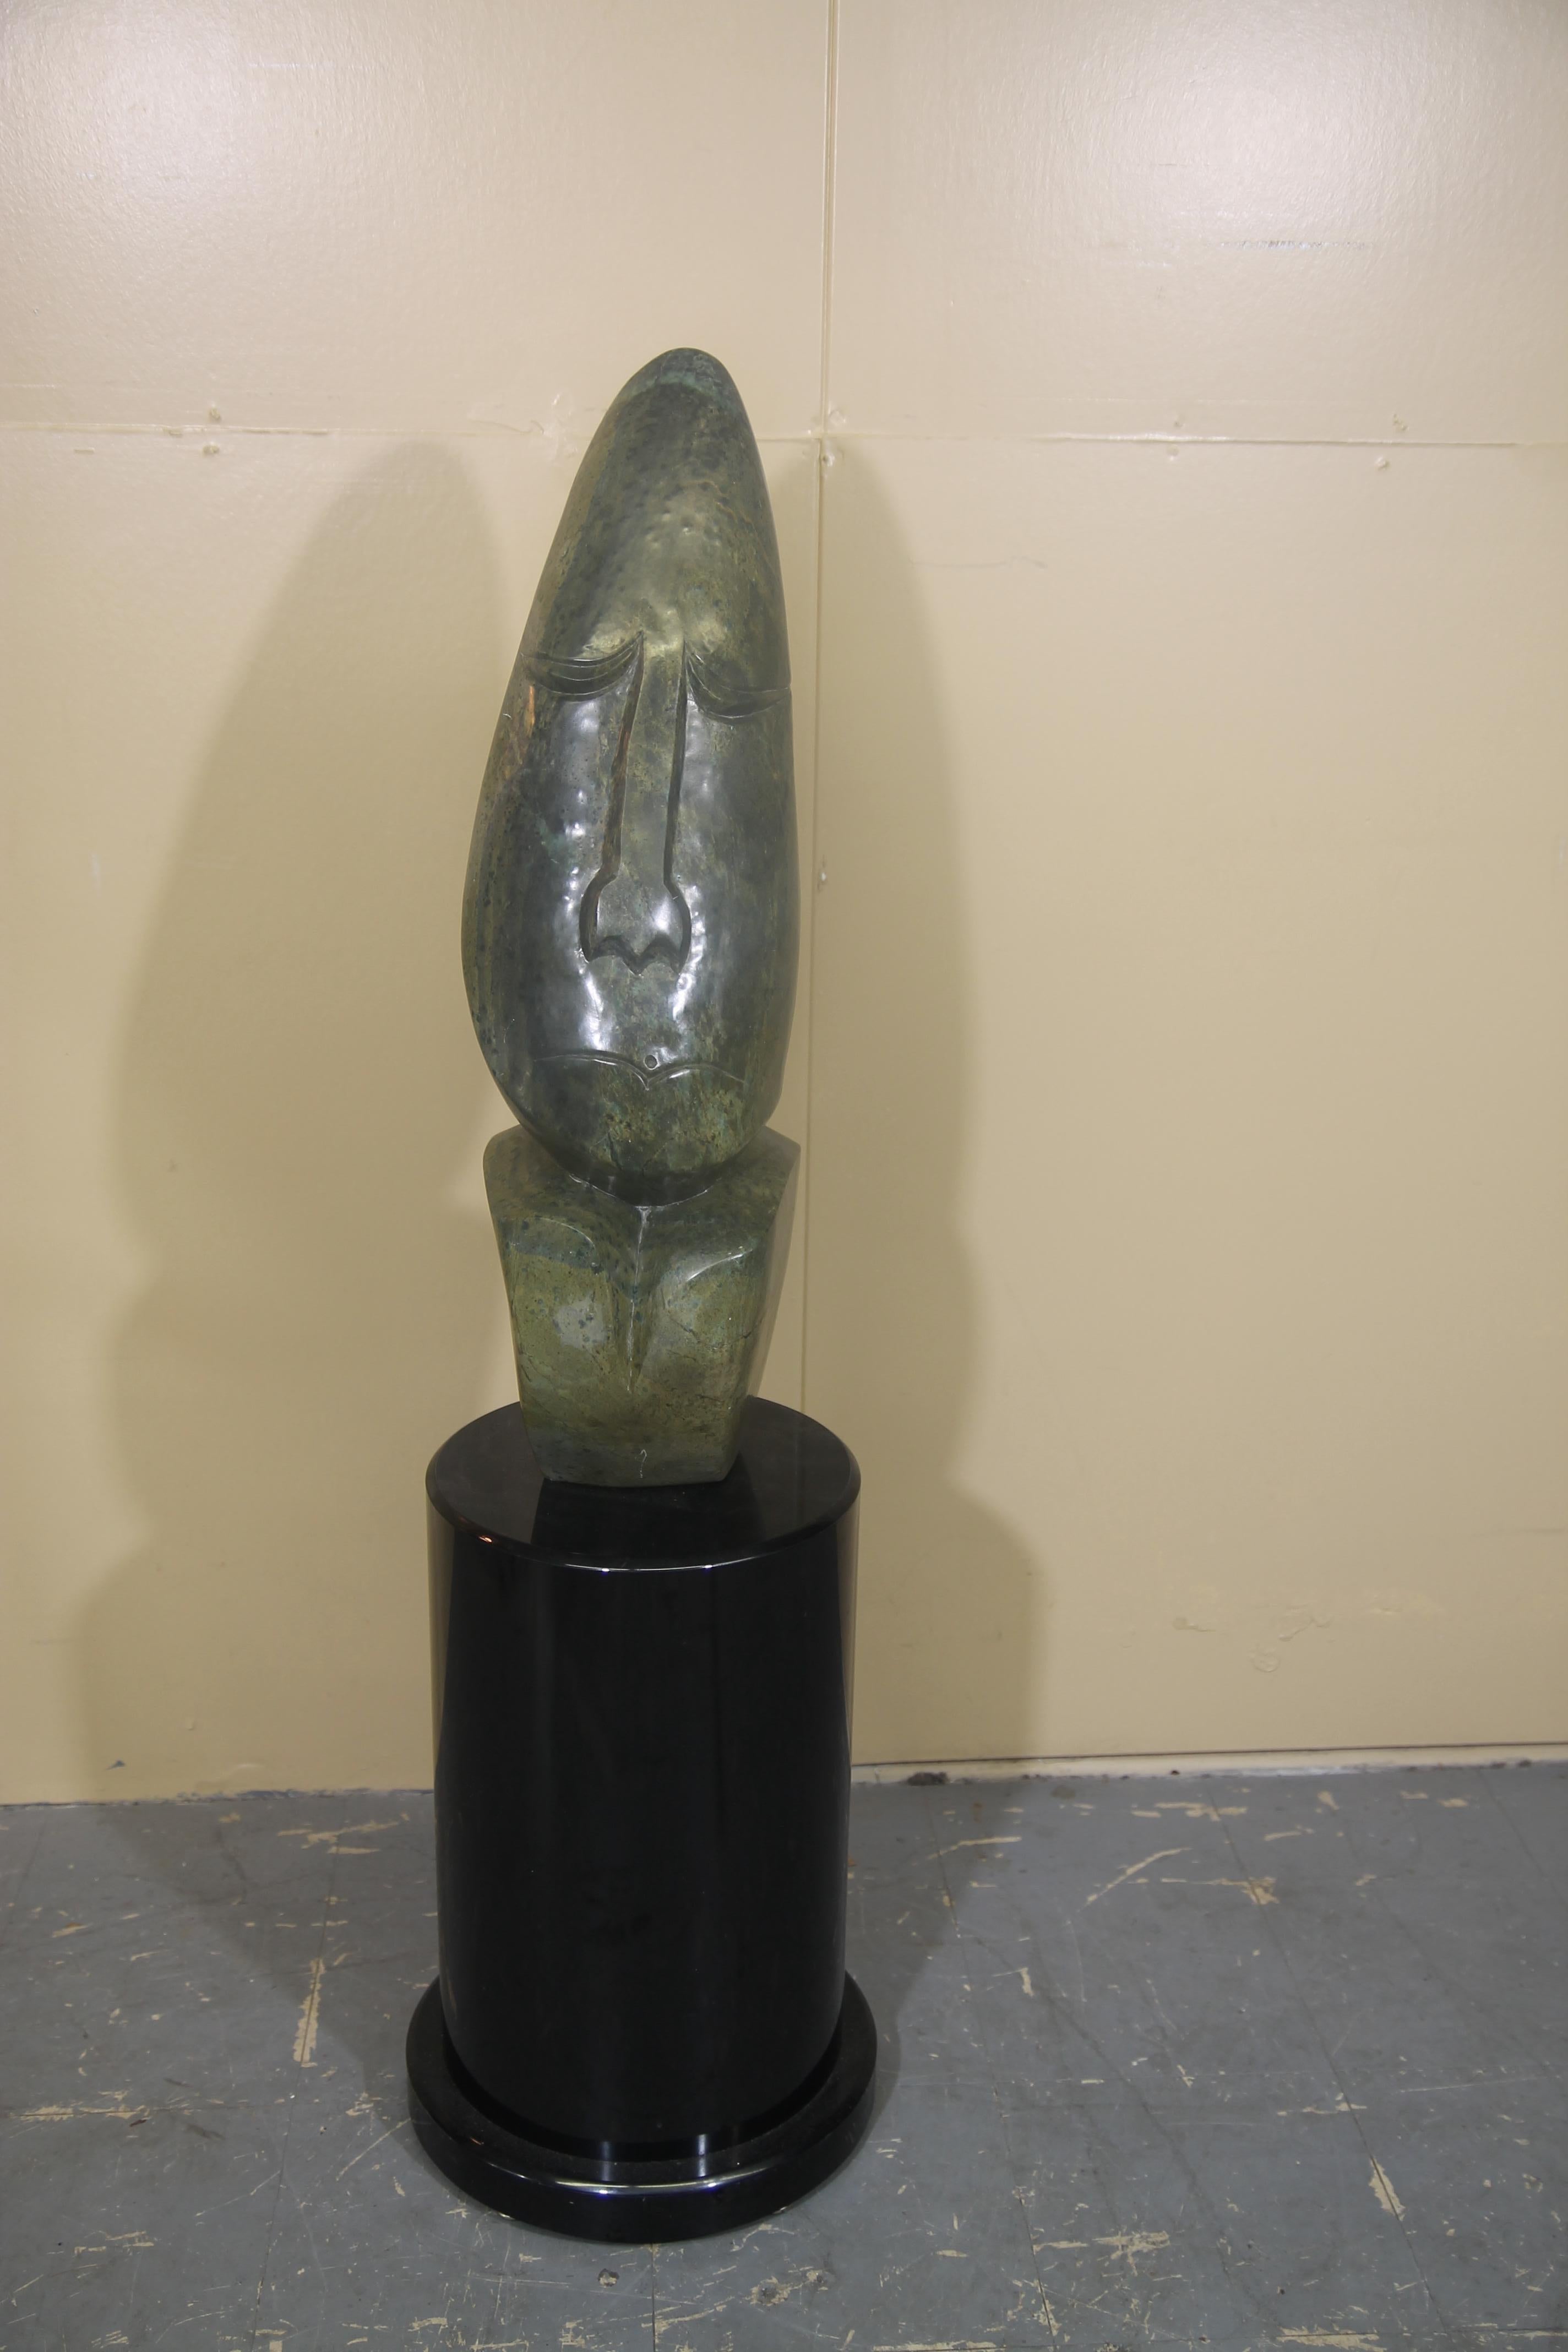 Wonderful hand carved African Alabaster Sculpture on black pedestal. Overall height including the base is 43 inches.